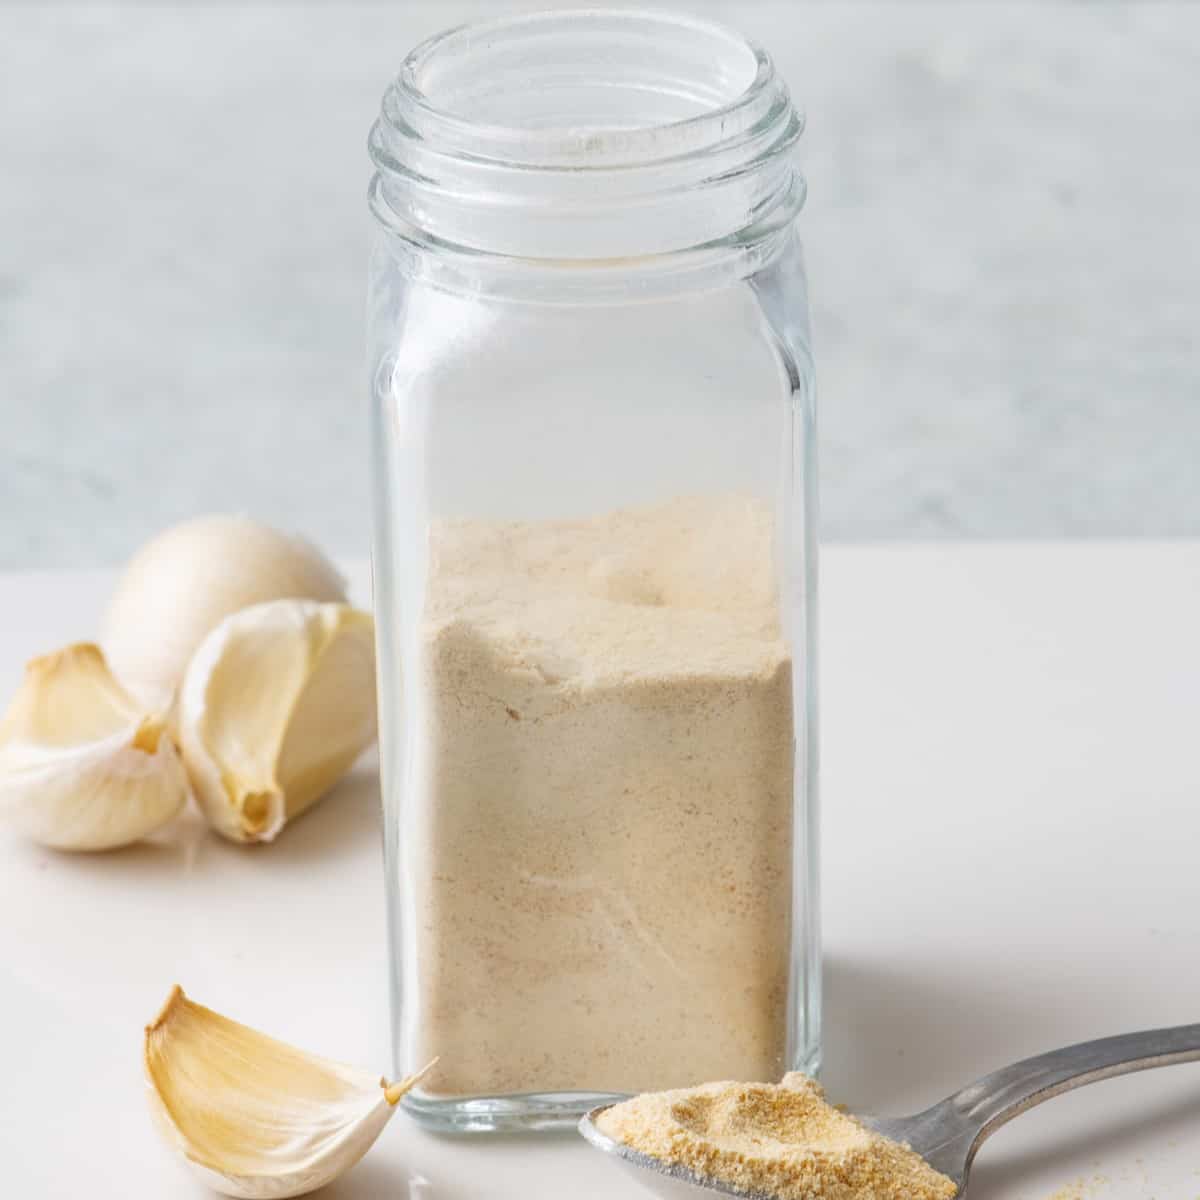 Garlic powder made from garlic cloves in a spice jar with more cloves nearby.